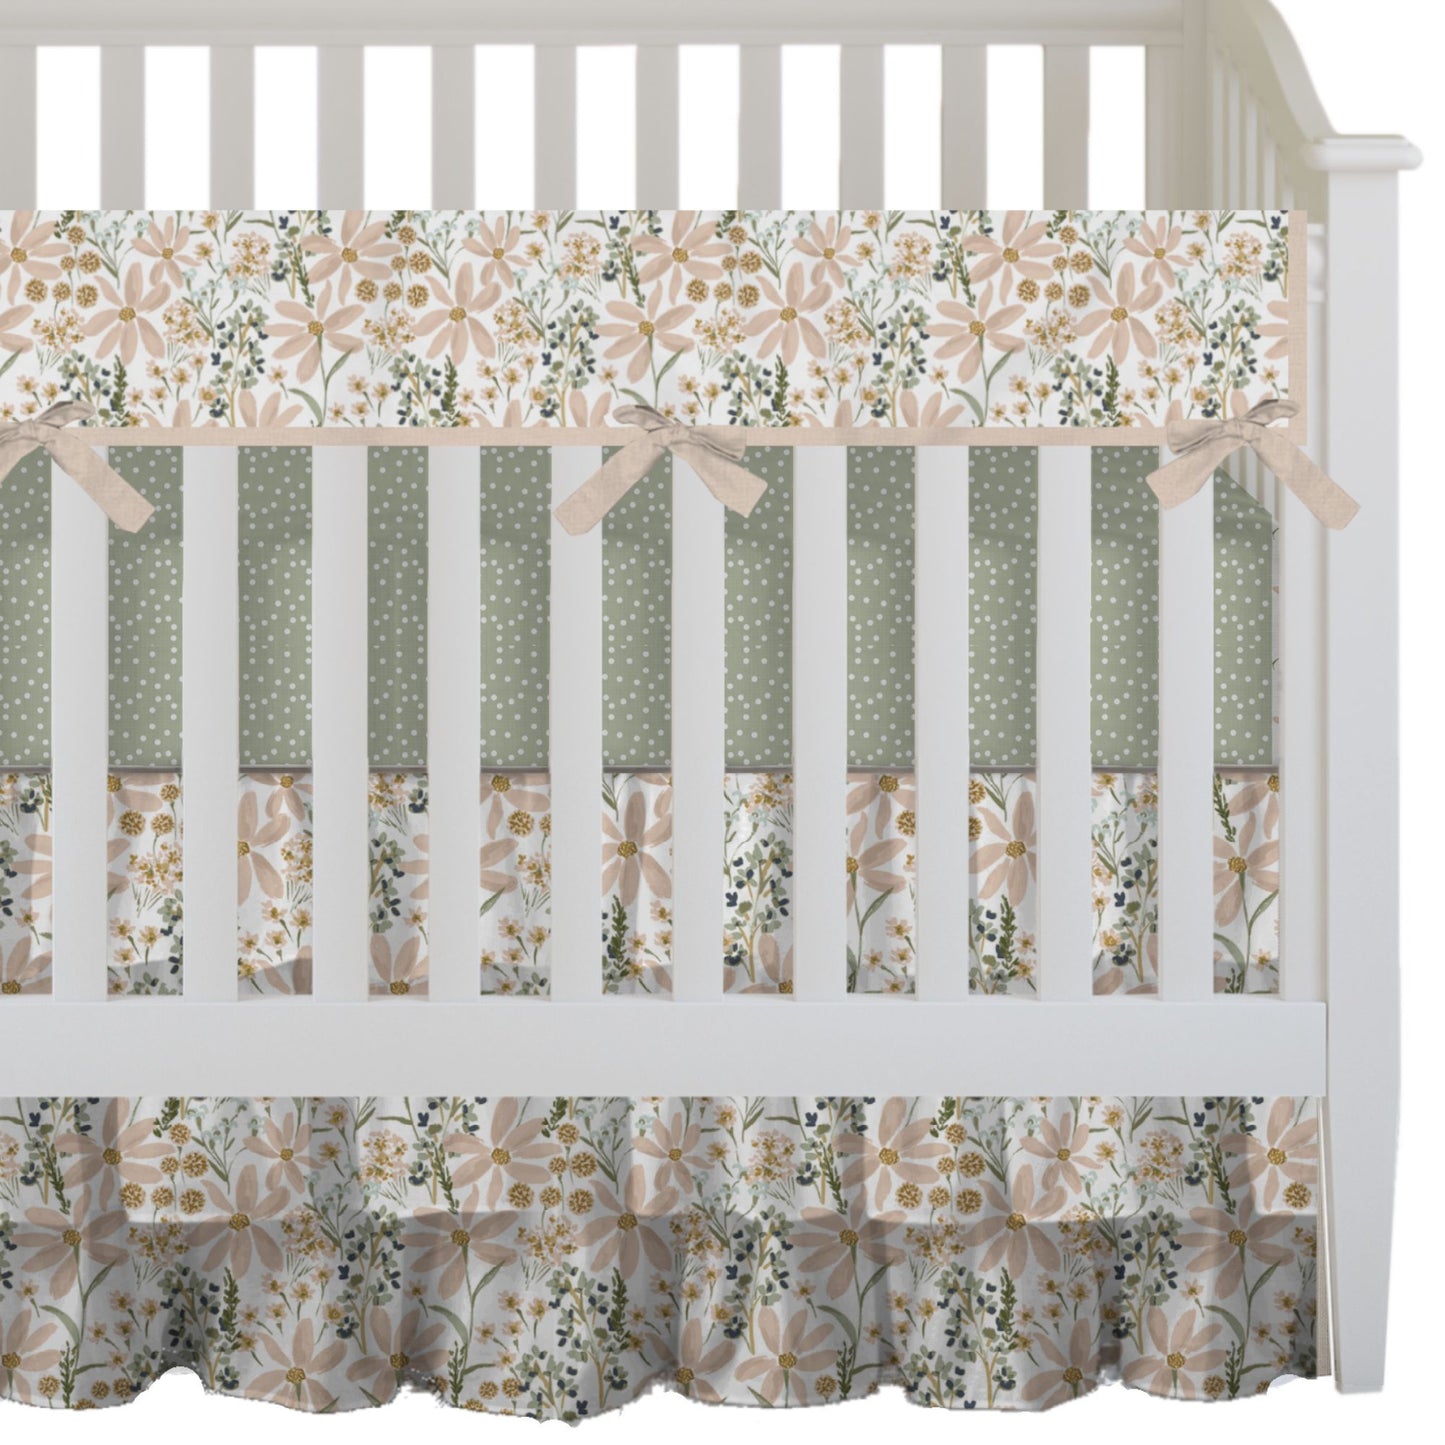 Daisy Dreams 3pc Bedding Set in Blooming